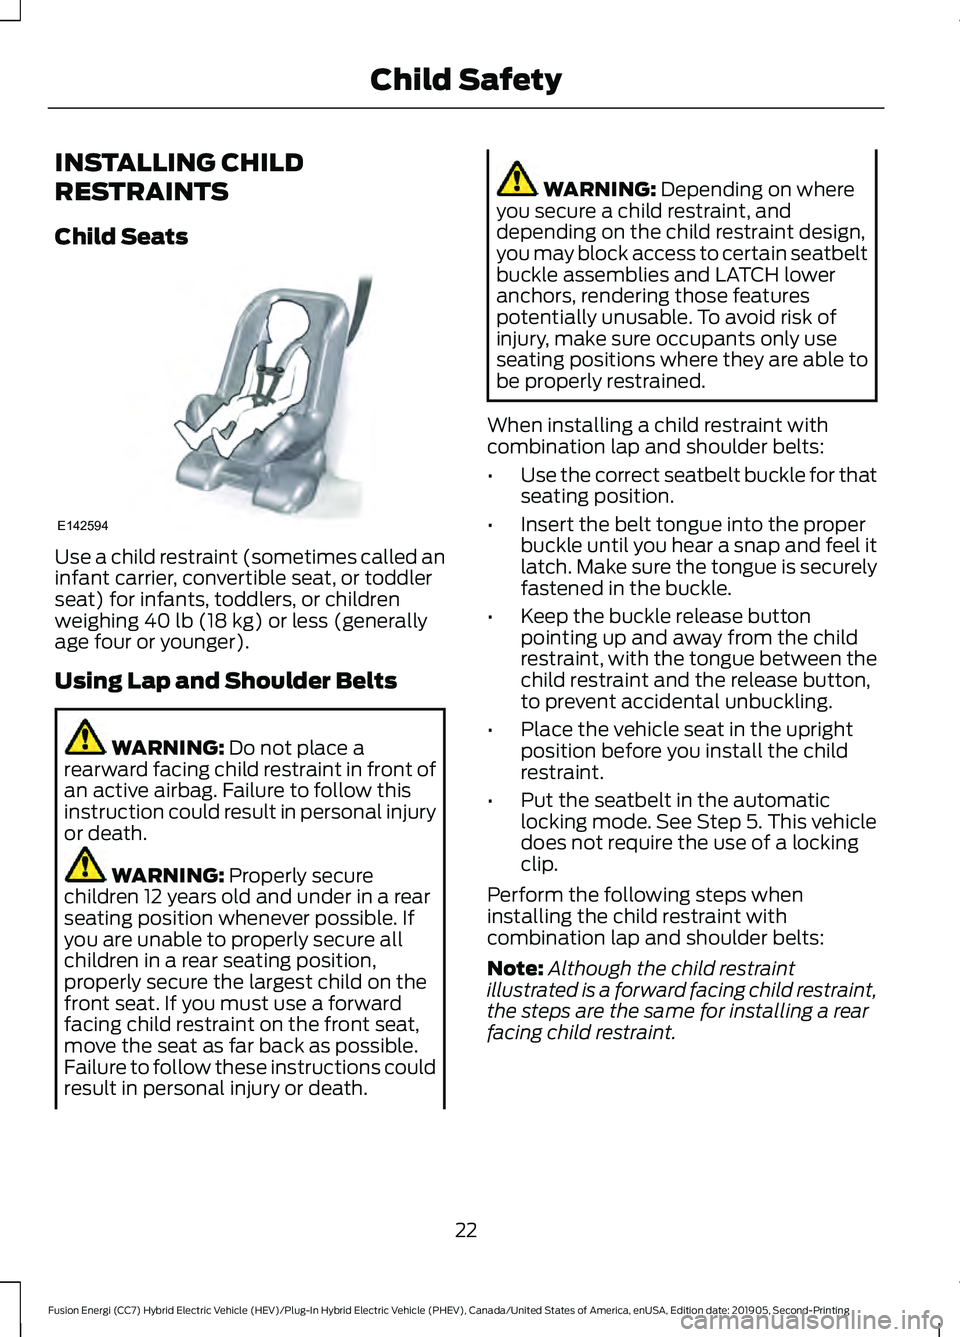 FORD FUSION ENERGI 2020  Owners Manual INSTALLING CHILD
RESTRAINTS
Child Seats
Use a child restraint (sometimes called an
infant carrier, convertible seat, or toddler
seat) for infants, toddlers, or children
weighing 40 lb (18 kg) or less 